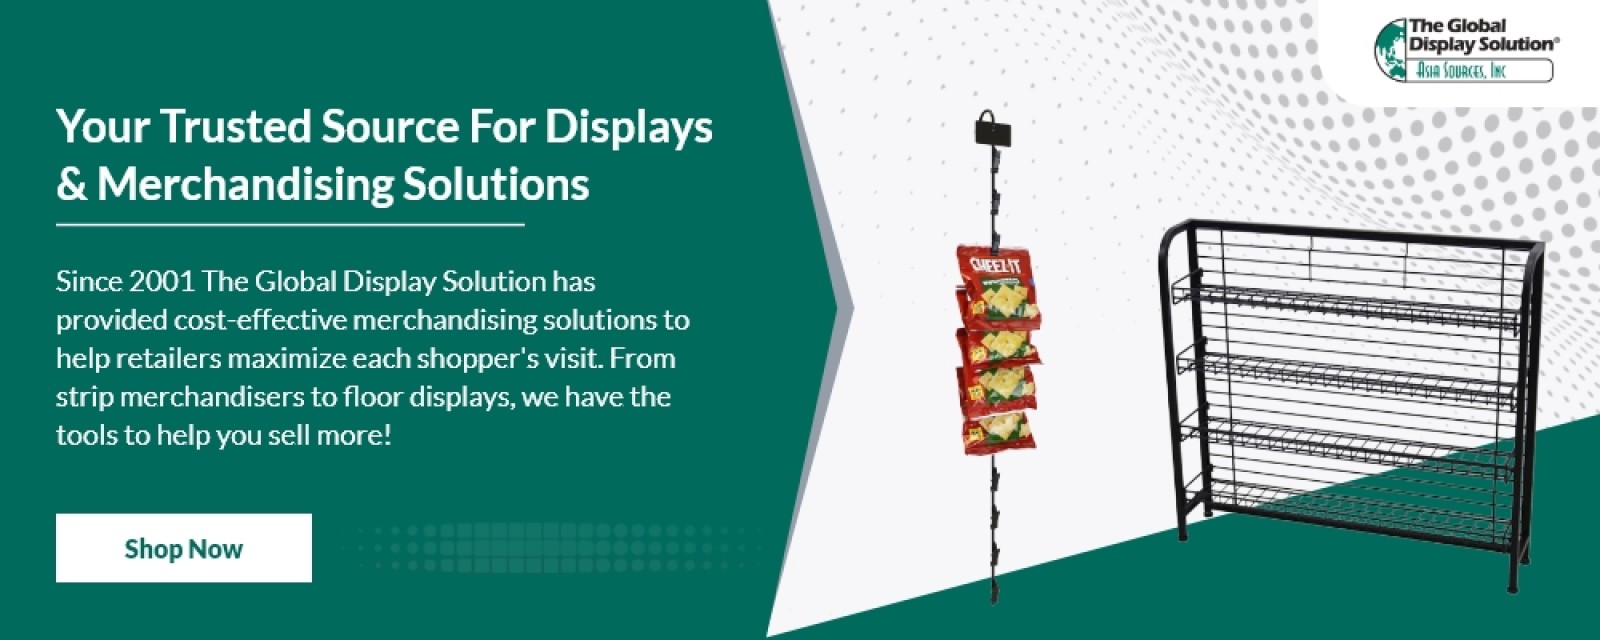 The Global Display Solution